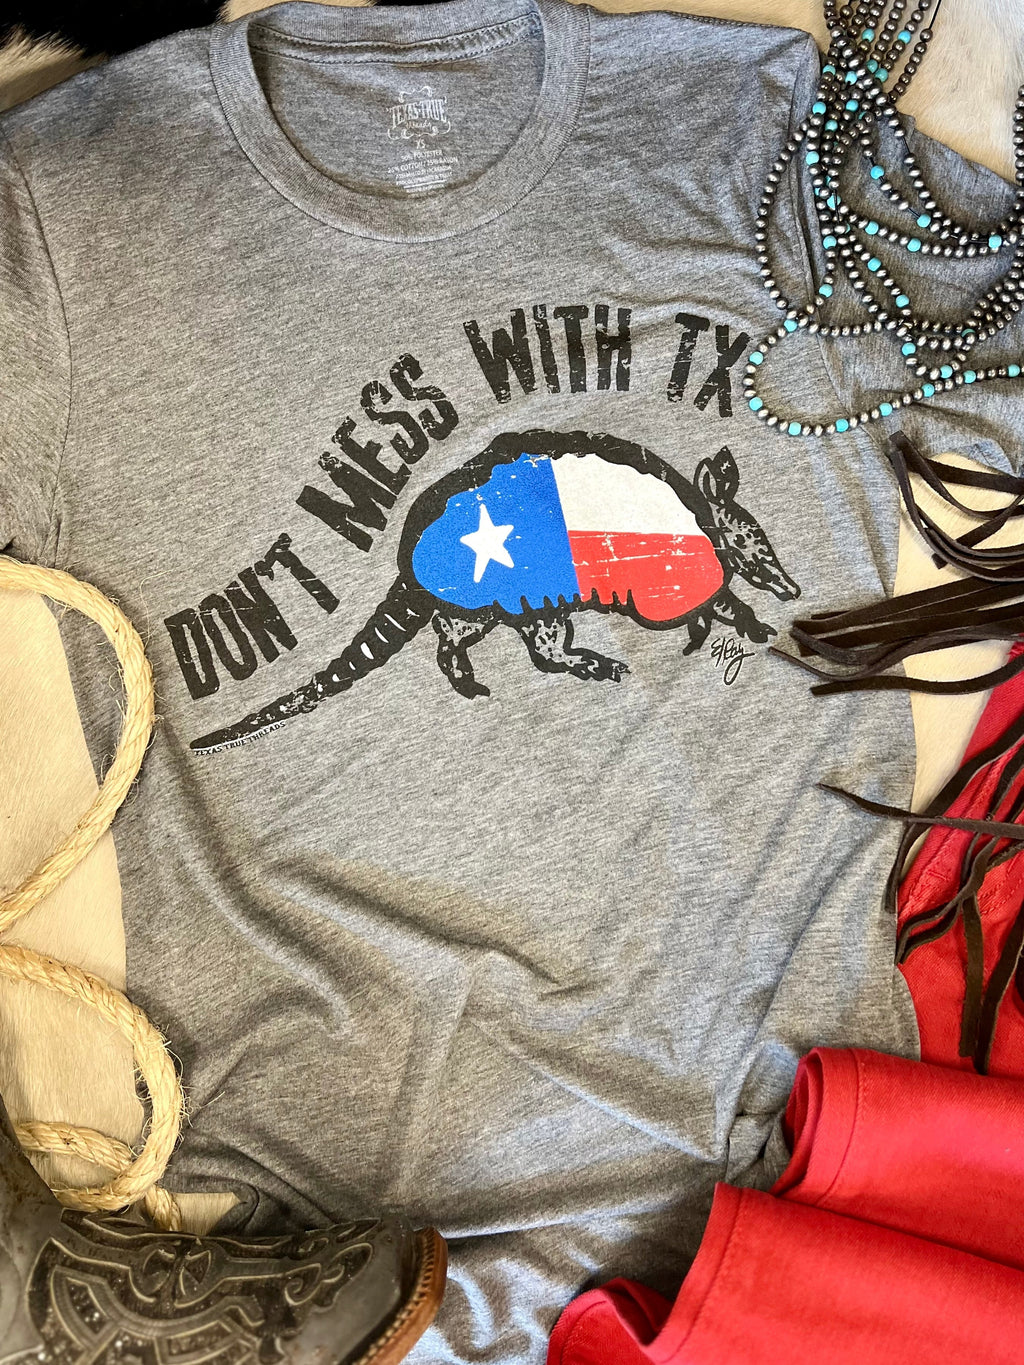 PLUS Don't Mess With Texas Graphic Tee | gussieduponline